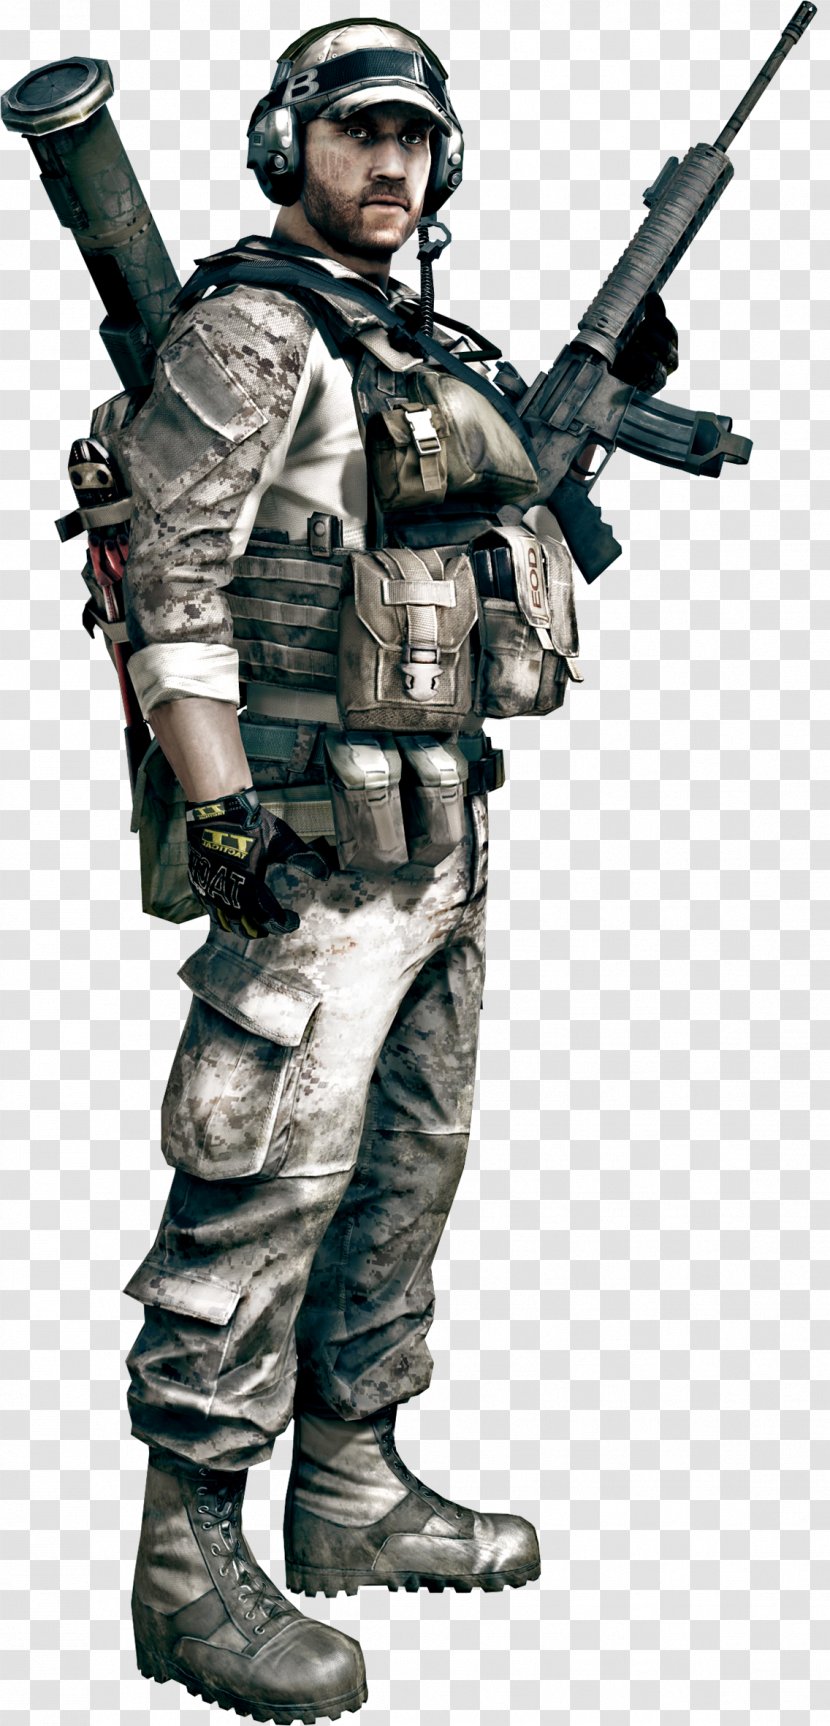 Battlefield 3 2 1 Heroes Play4Free - Non Commissioned Officer - Clipart Transparent PNG